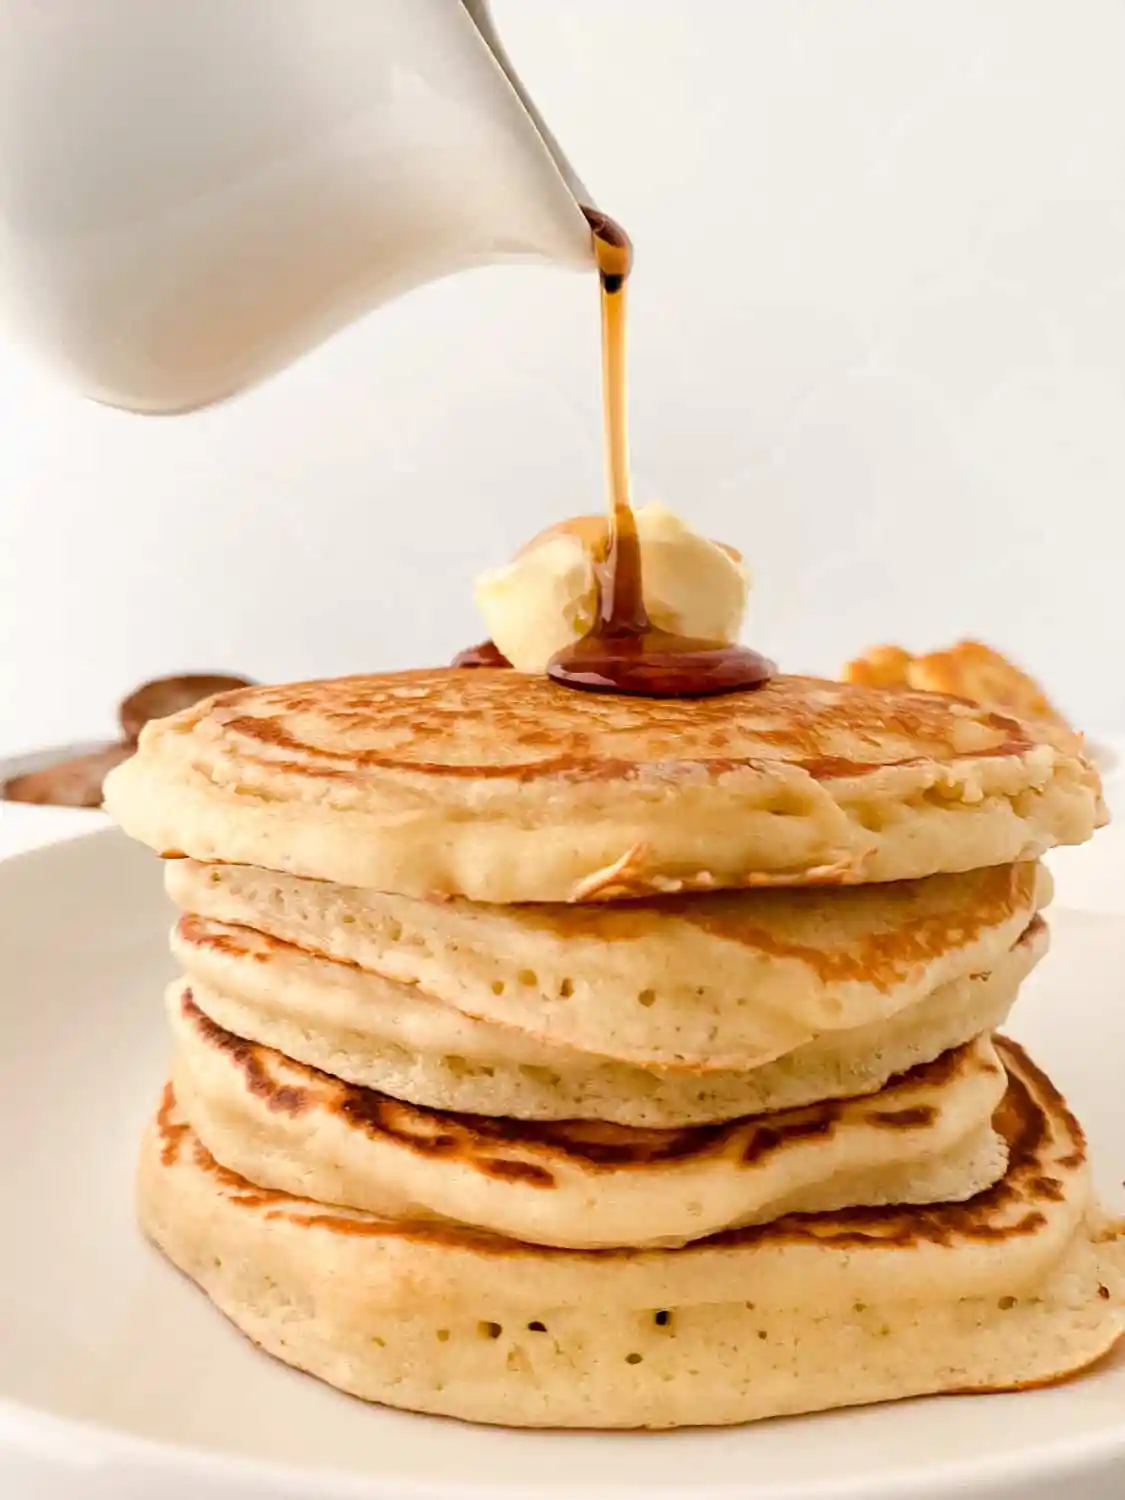 syrup being poured on stack of pancakes with butter on top